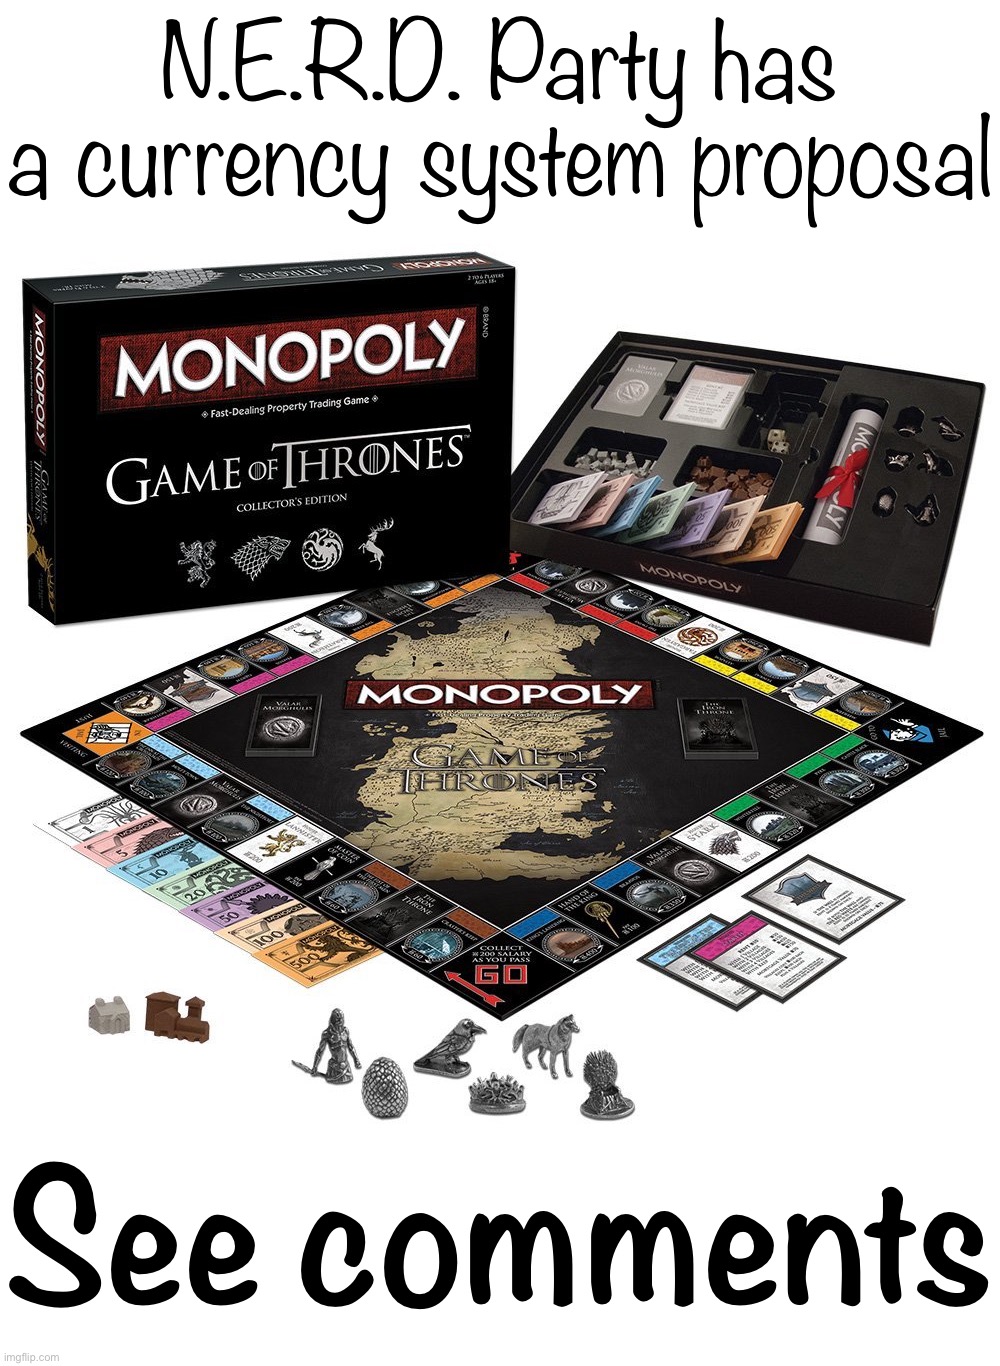 N.E.R.D. Party proposal for a workable currency system on Imgflip. :) | N.E.R.D. Party has a currency system proposal; See comments | image tagged in game of thrones monopoly,monopoly,monopoly money,currency,imgflip_presidents,proposal | made w/ Imgflip meme maker